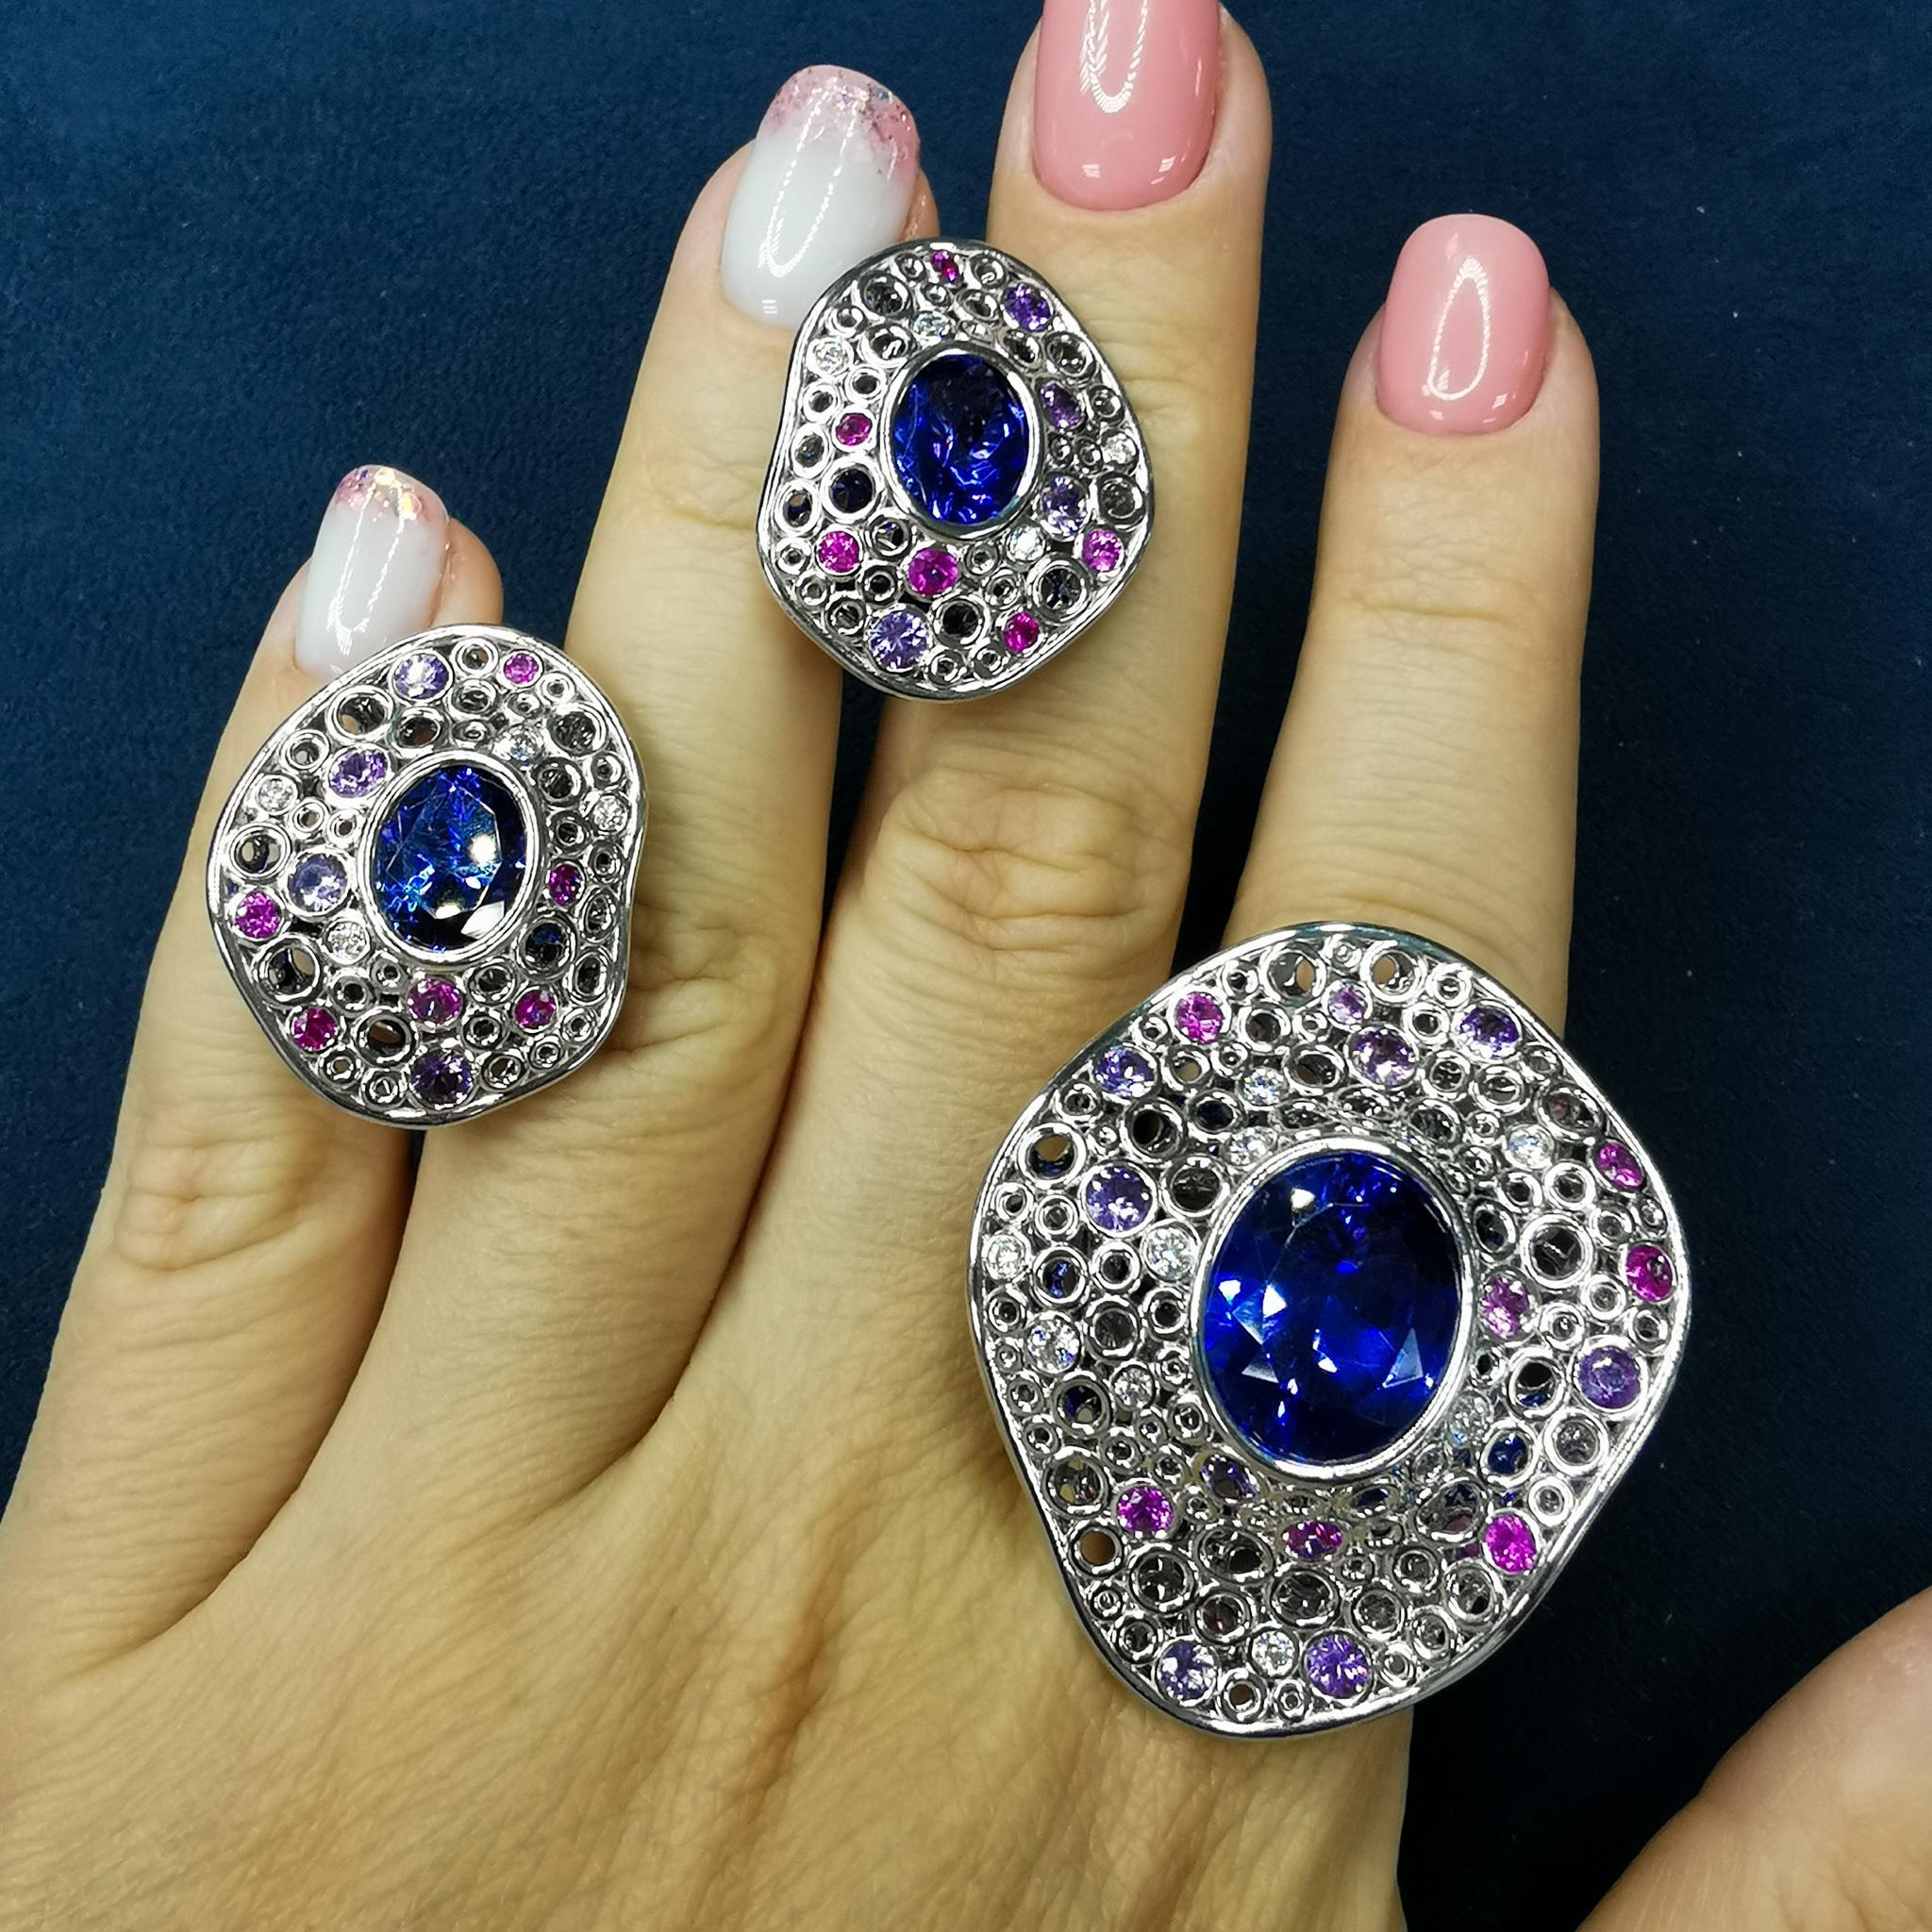 Tanzanites Diamonds Sapphires 18 Karat White Gold Bubble Suite
Incredibly light and airy Suite from our Bubbles Collection. White 18 Karat Gold is made in the form of variety of small bubbles, some of which have Pink and Purple Sapphires and